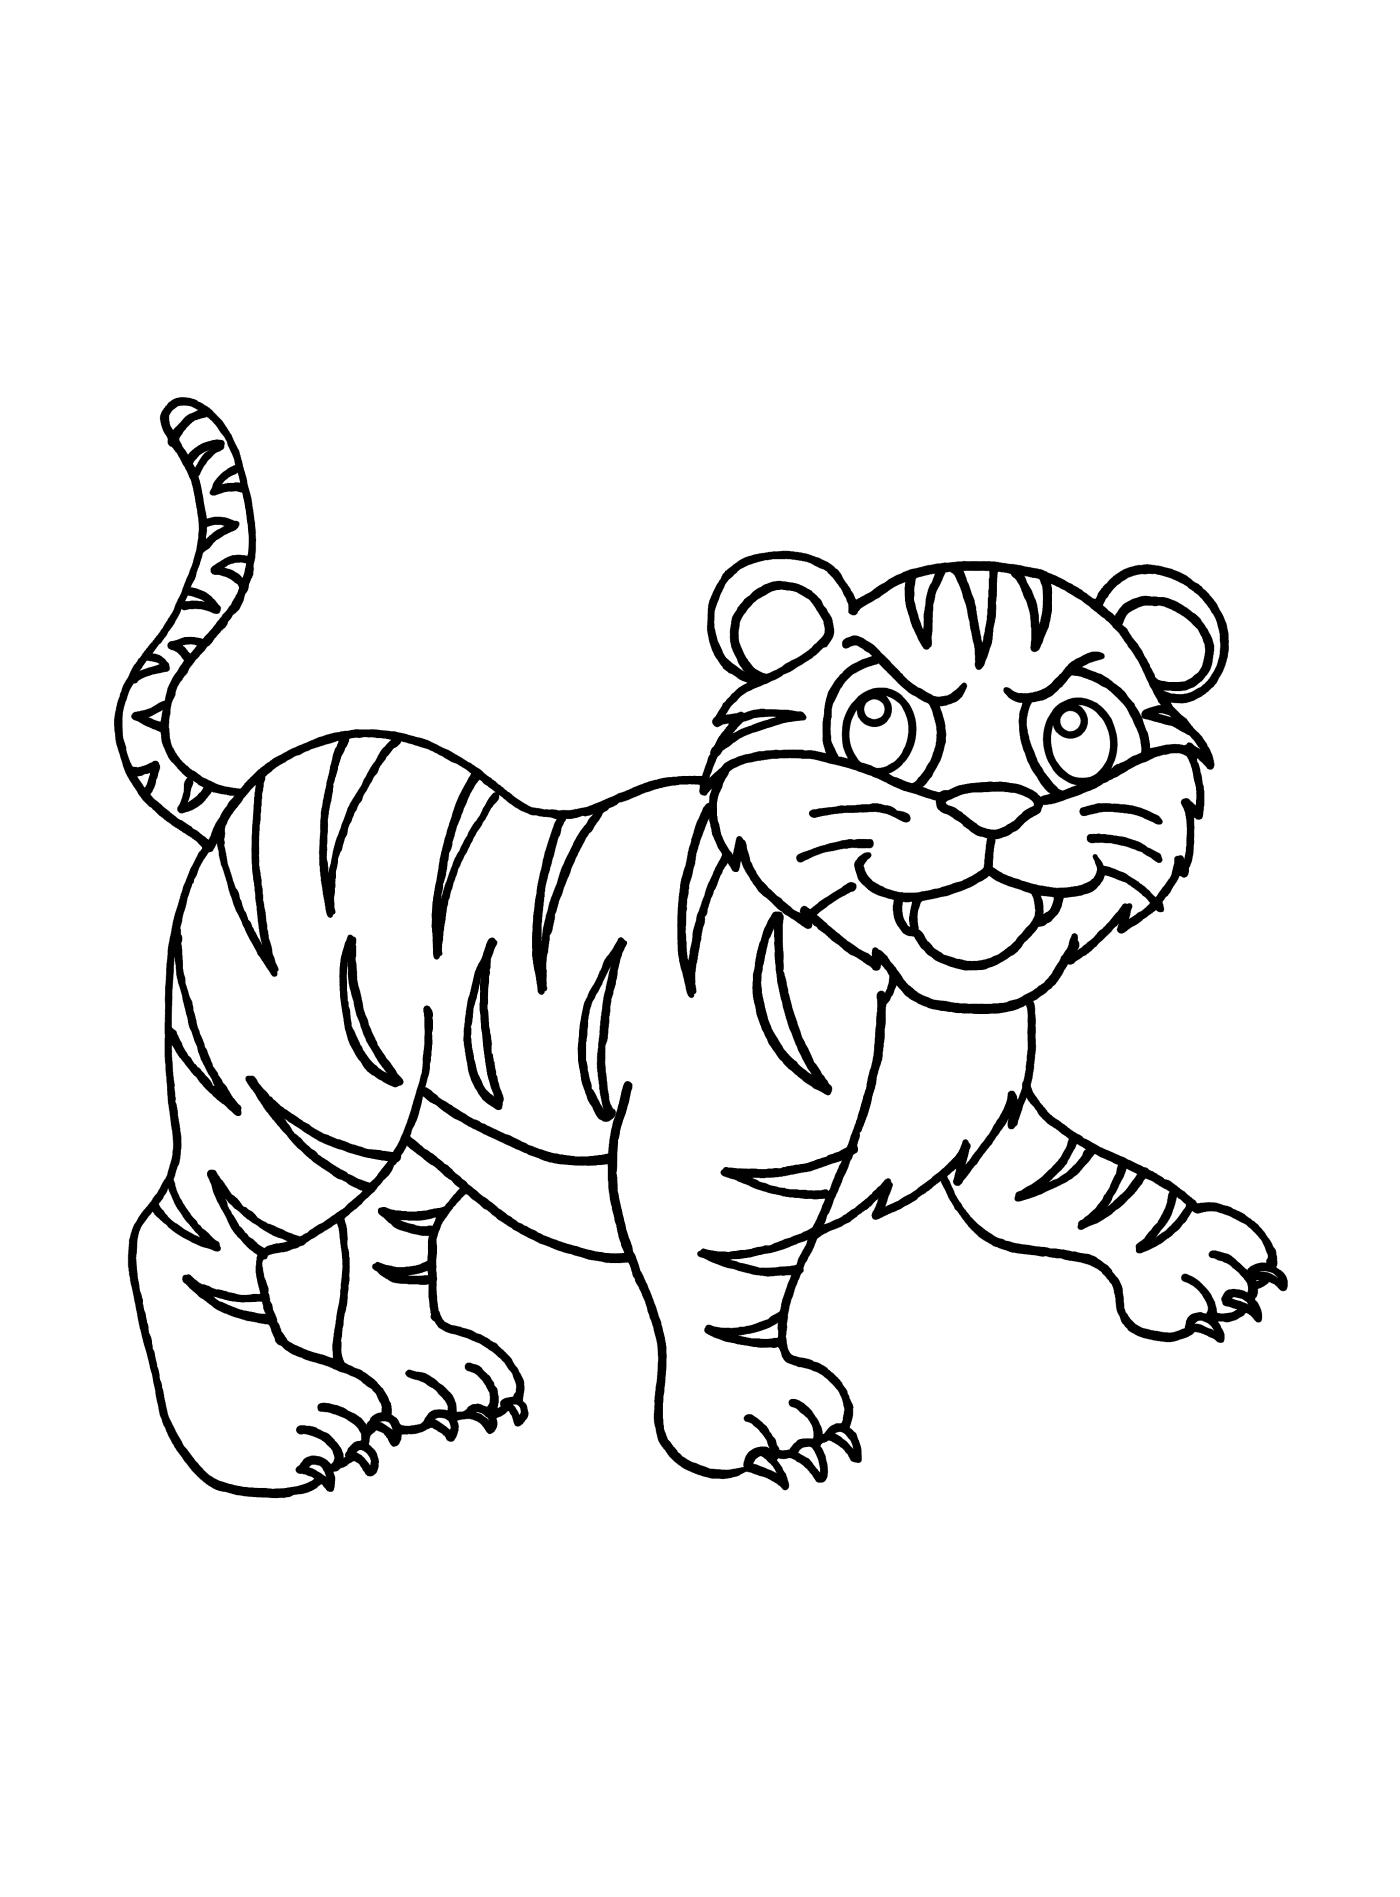  A tiger from the Panthera Tigris family 